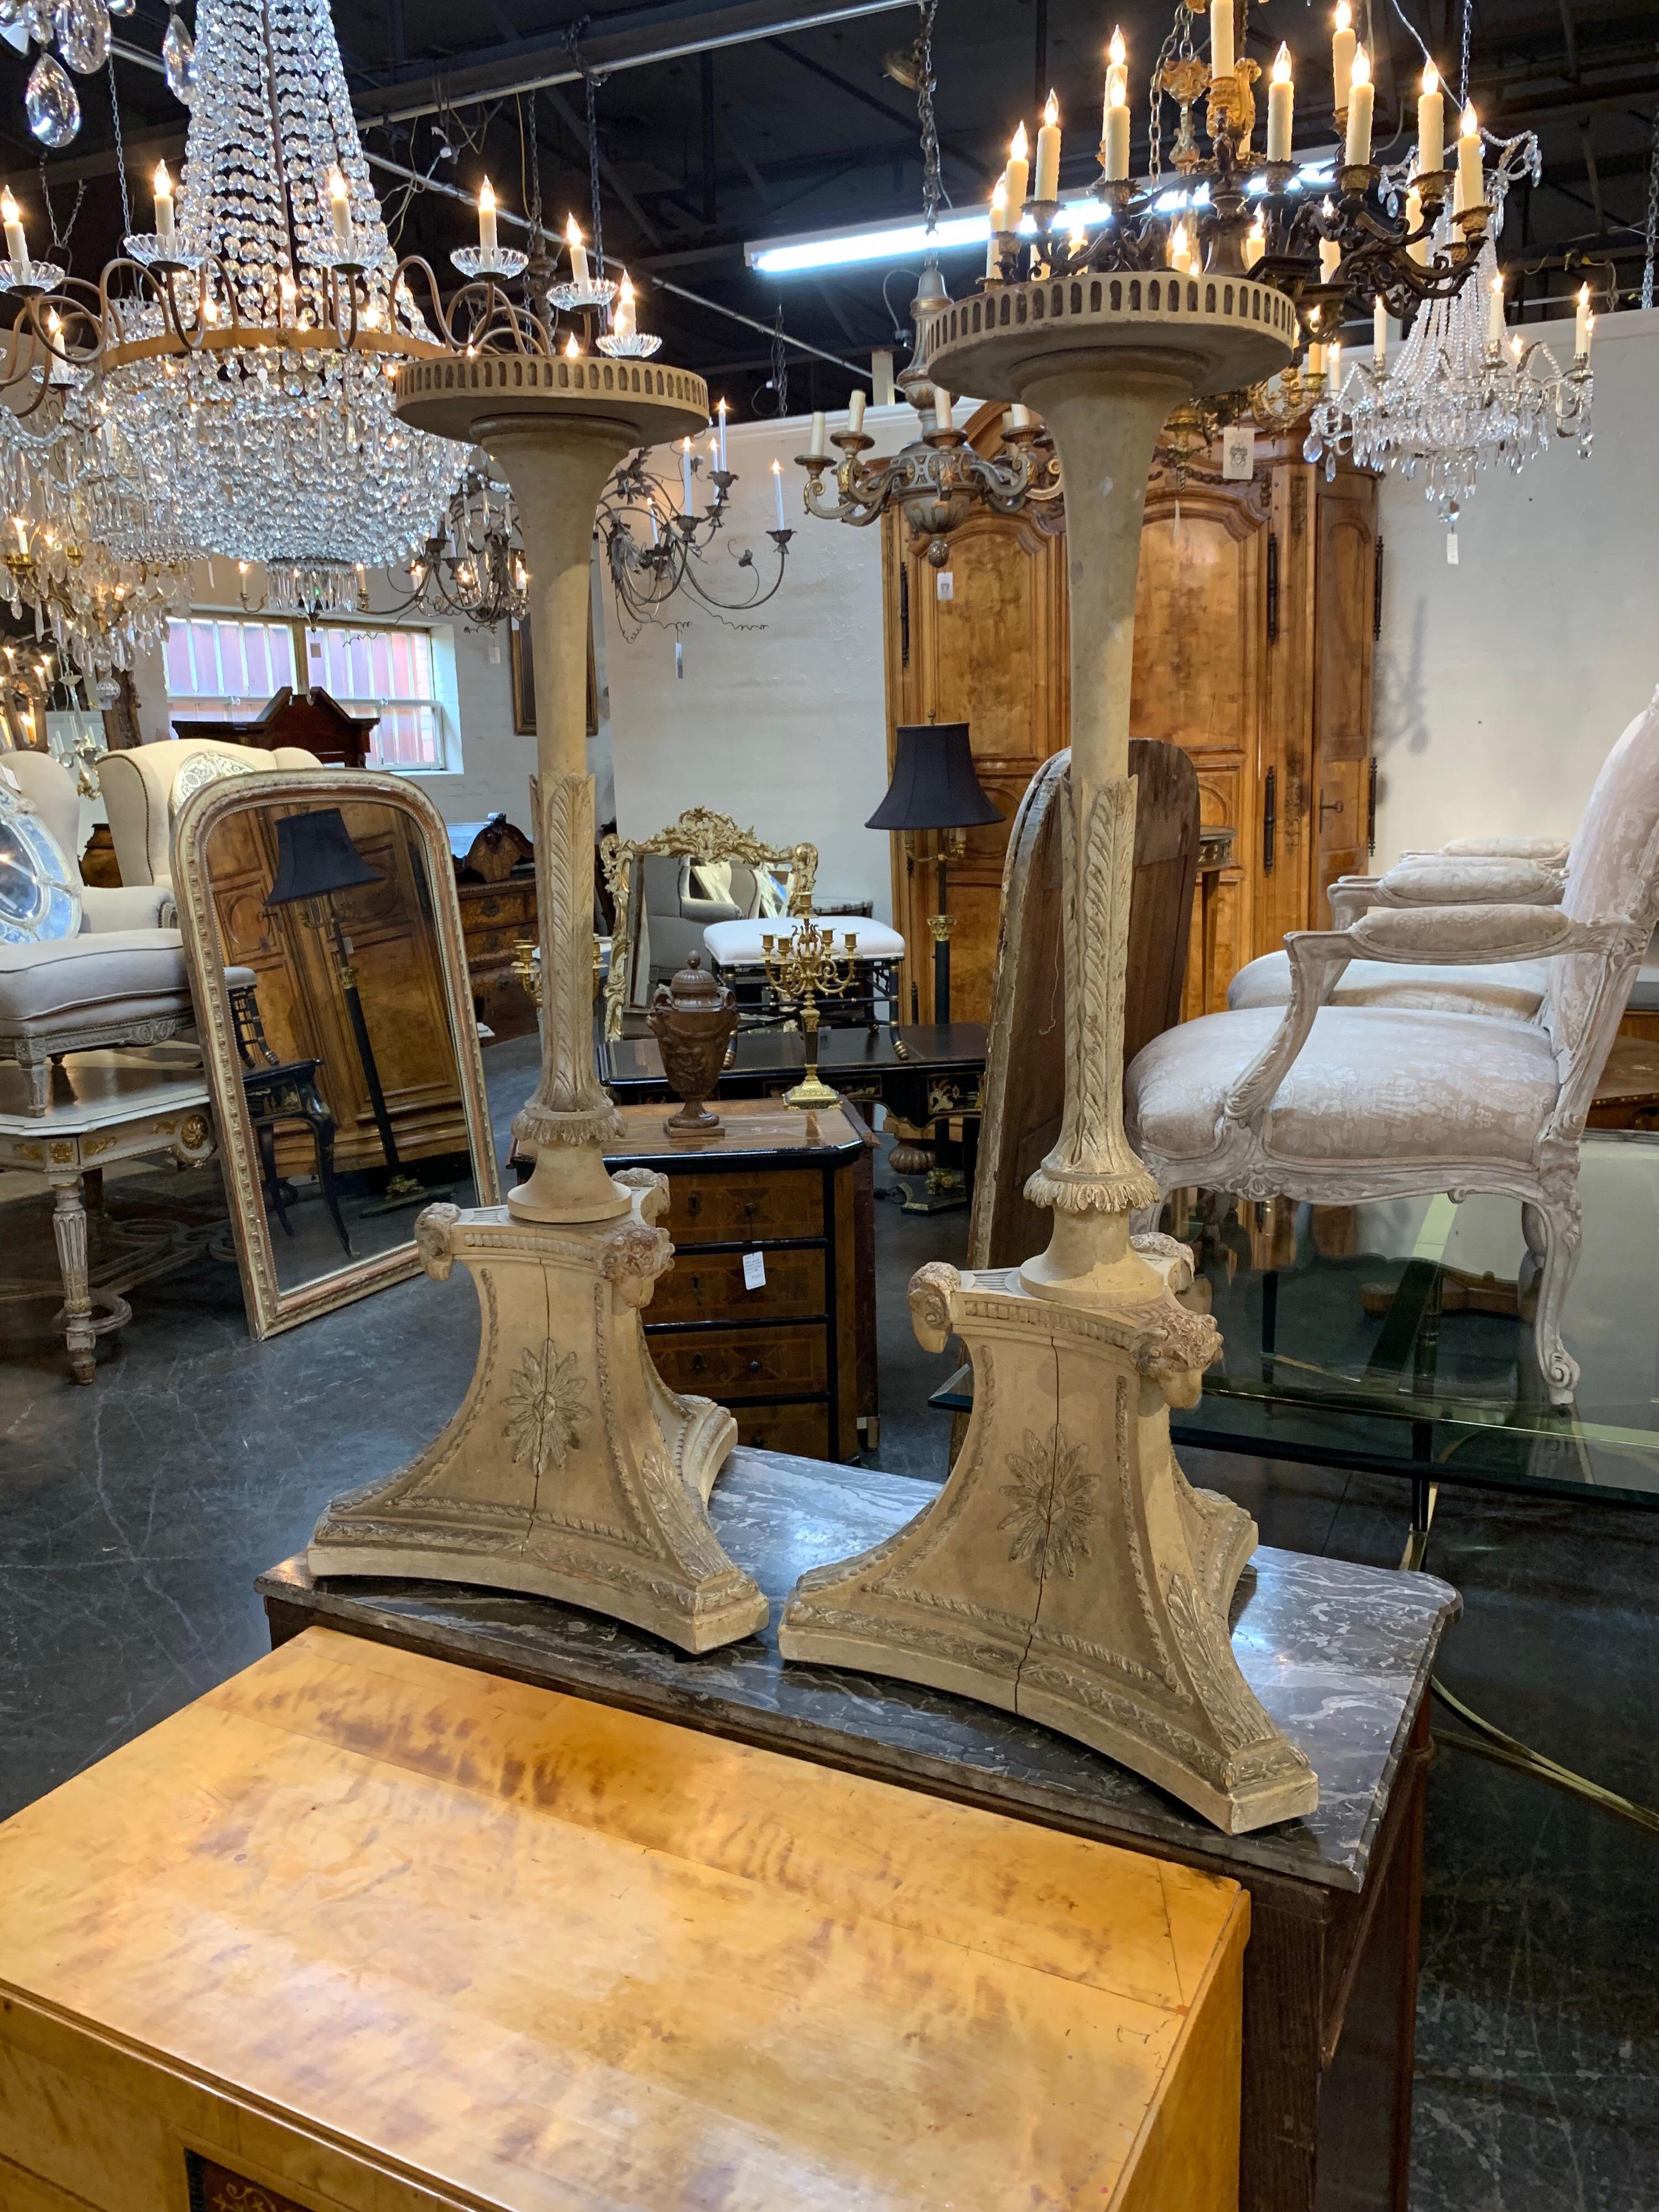 Pair of 19th century French carved and painted plant stands. Very nice carving and the neoclassical design would make a unique statement for your home or garden. The top of the pedestals is 10.5 inches. So pretty!